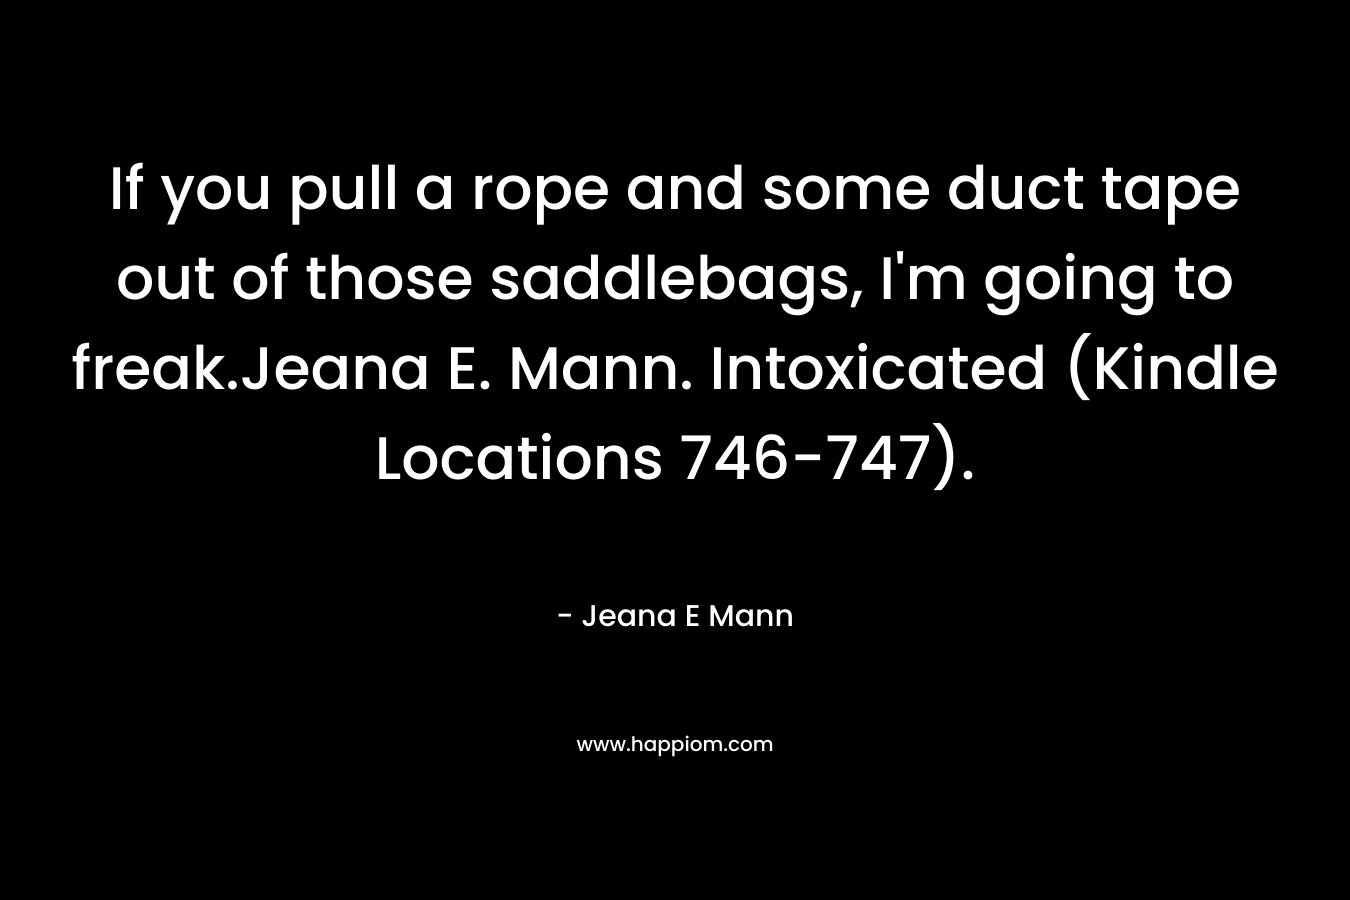 If you pull a rope and some duct tape out of those saddlebags, I'm going to freak.Jeana E. Mann. Intoxicated (Kindle Locations 746-747).